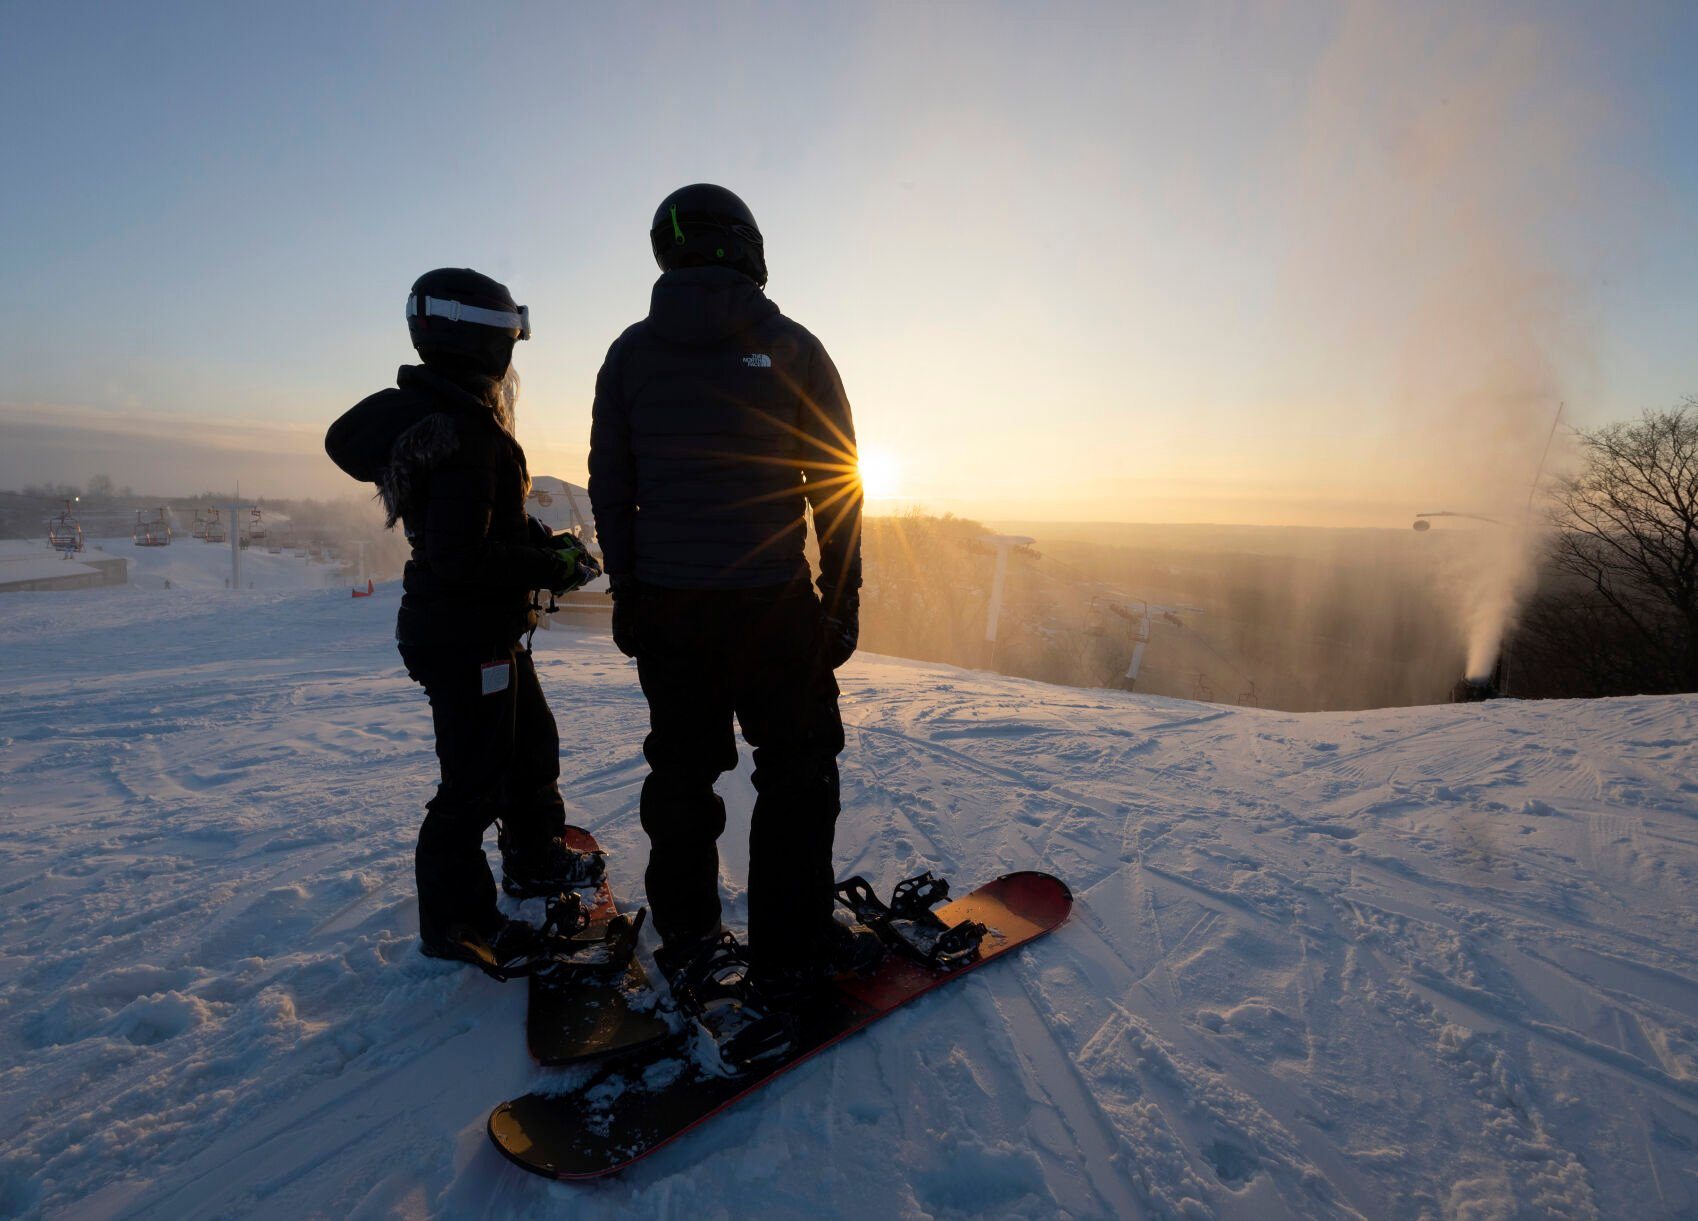 Abbie Janik (left) and Trevor Burrows, both of North Liberty, Iowa, look down the slopes at Sundown Mountain Resort in Dubuque on Friday, Jan. 6, 2023    PHOTO CREDIT: Stephen Gassman